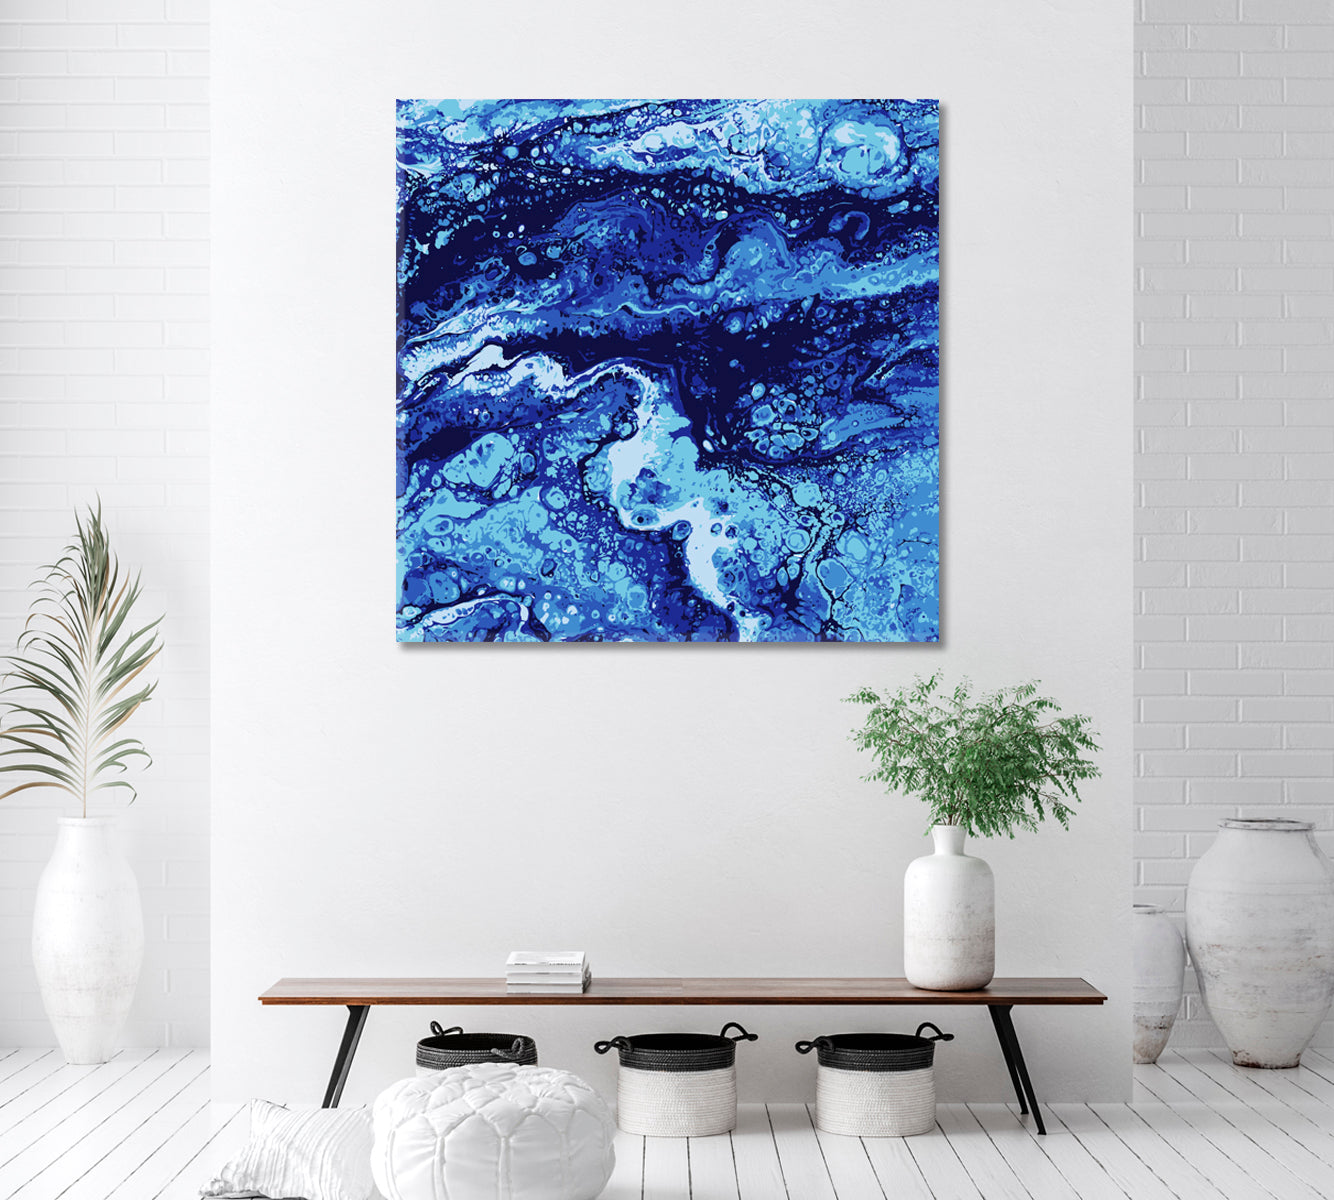 Abstract Blue Liquid Pattern Canvas Print ArtLexy 1 Panel 12"x12" inches 